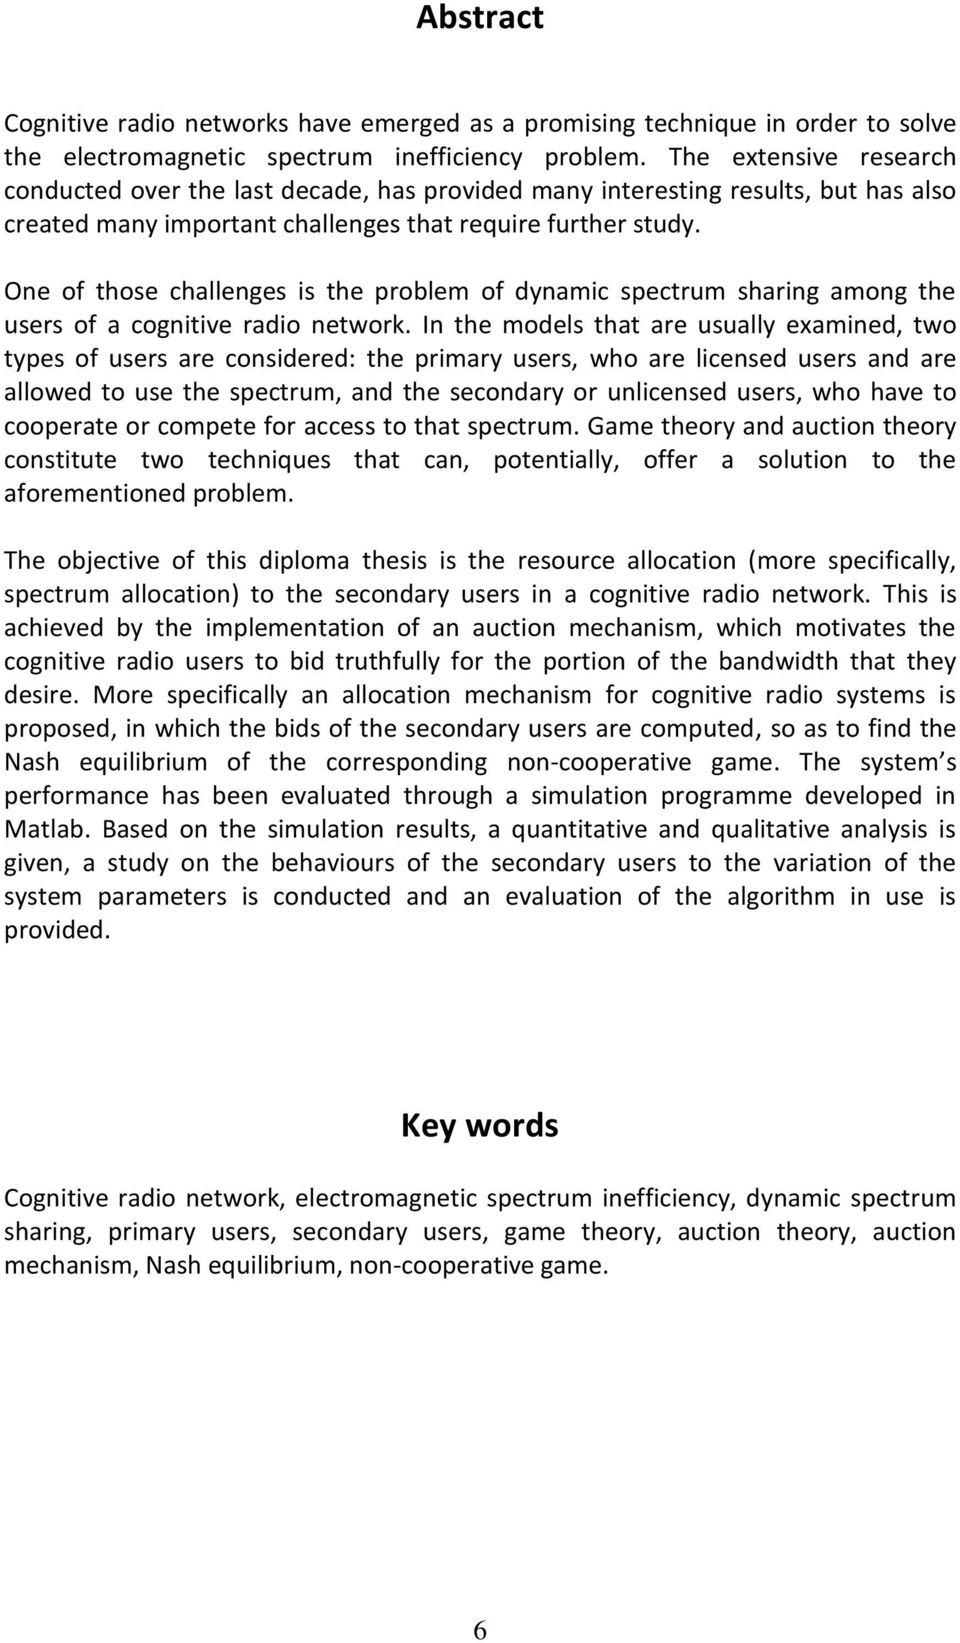 One of those challenges is the problem of dynamic spectrum sharing among the users of a cognitive radio network.